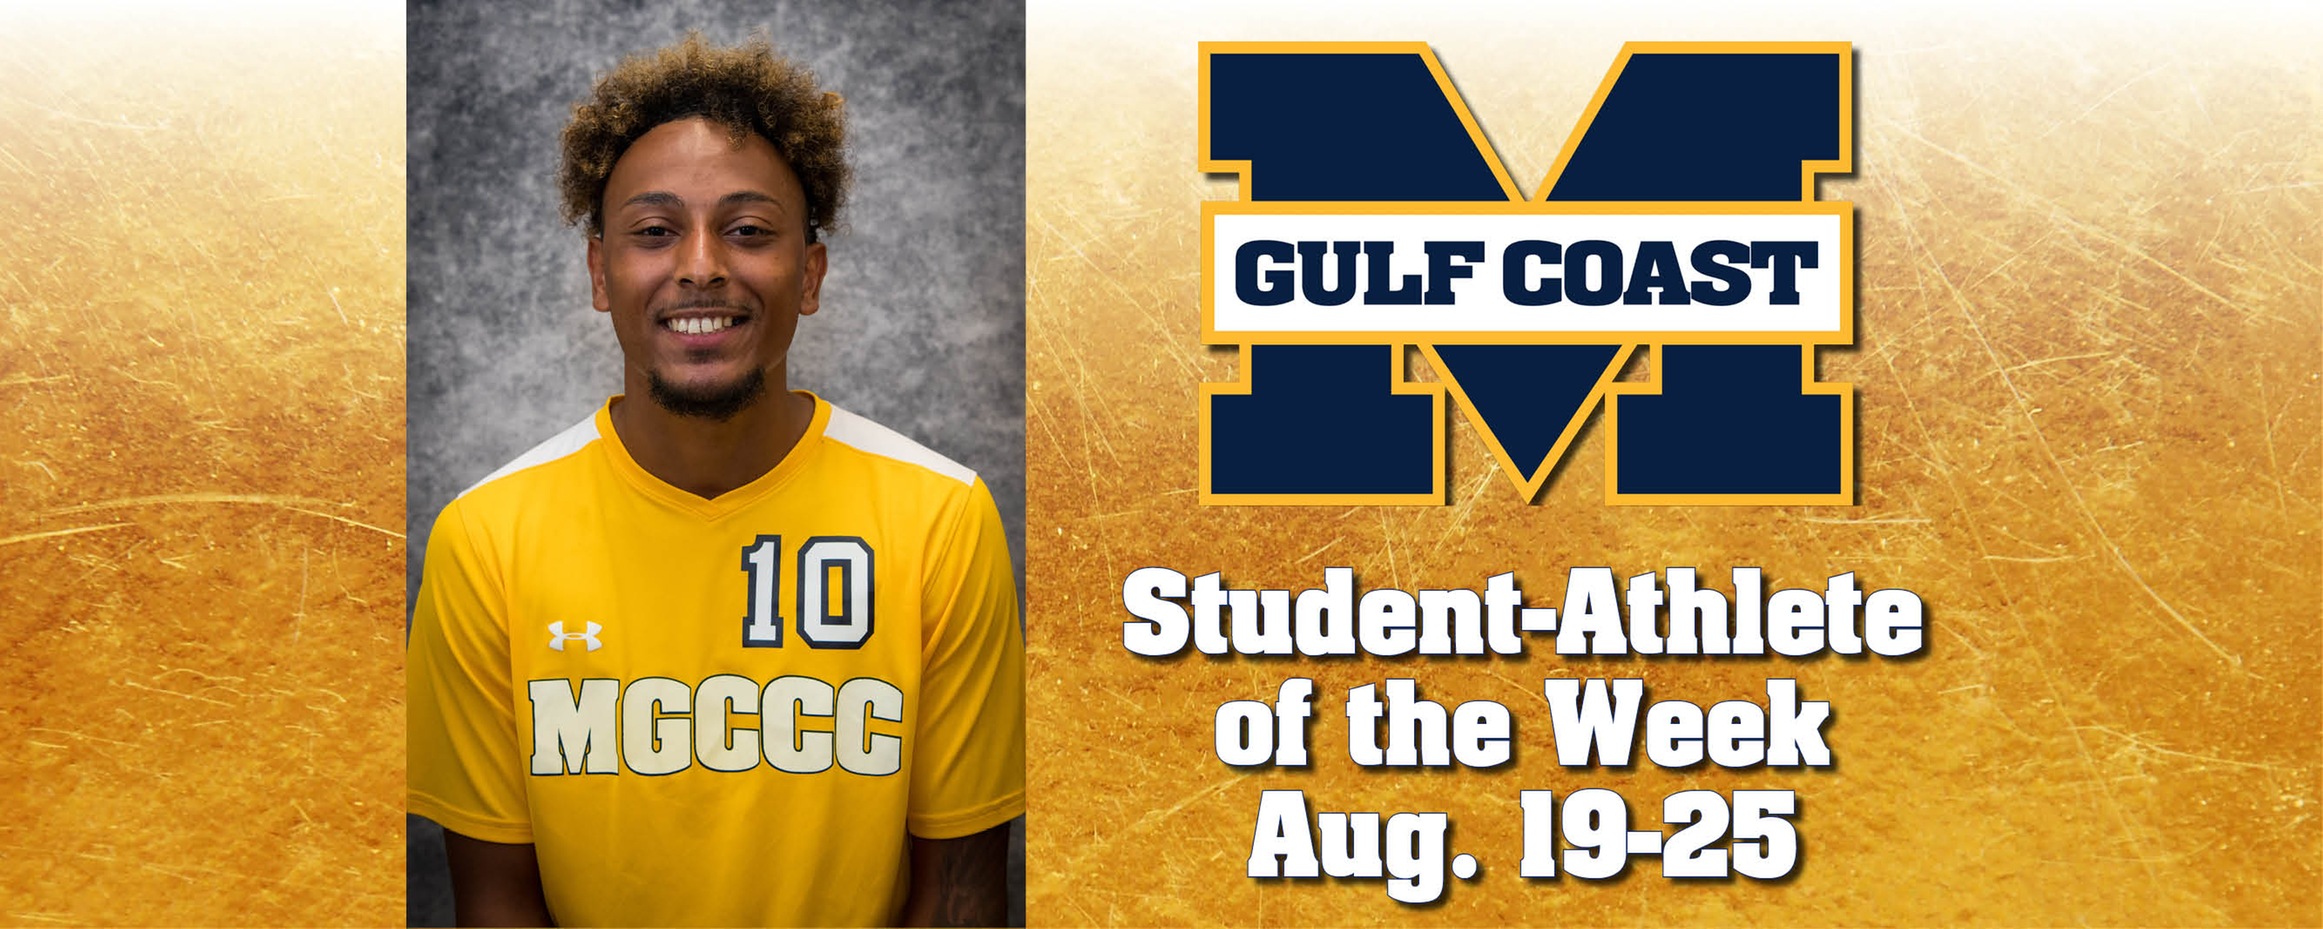 Redmond wins MGCCC Student-Athlete of the Week